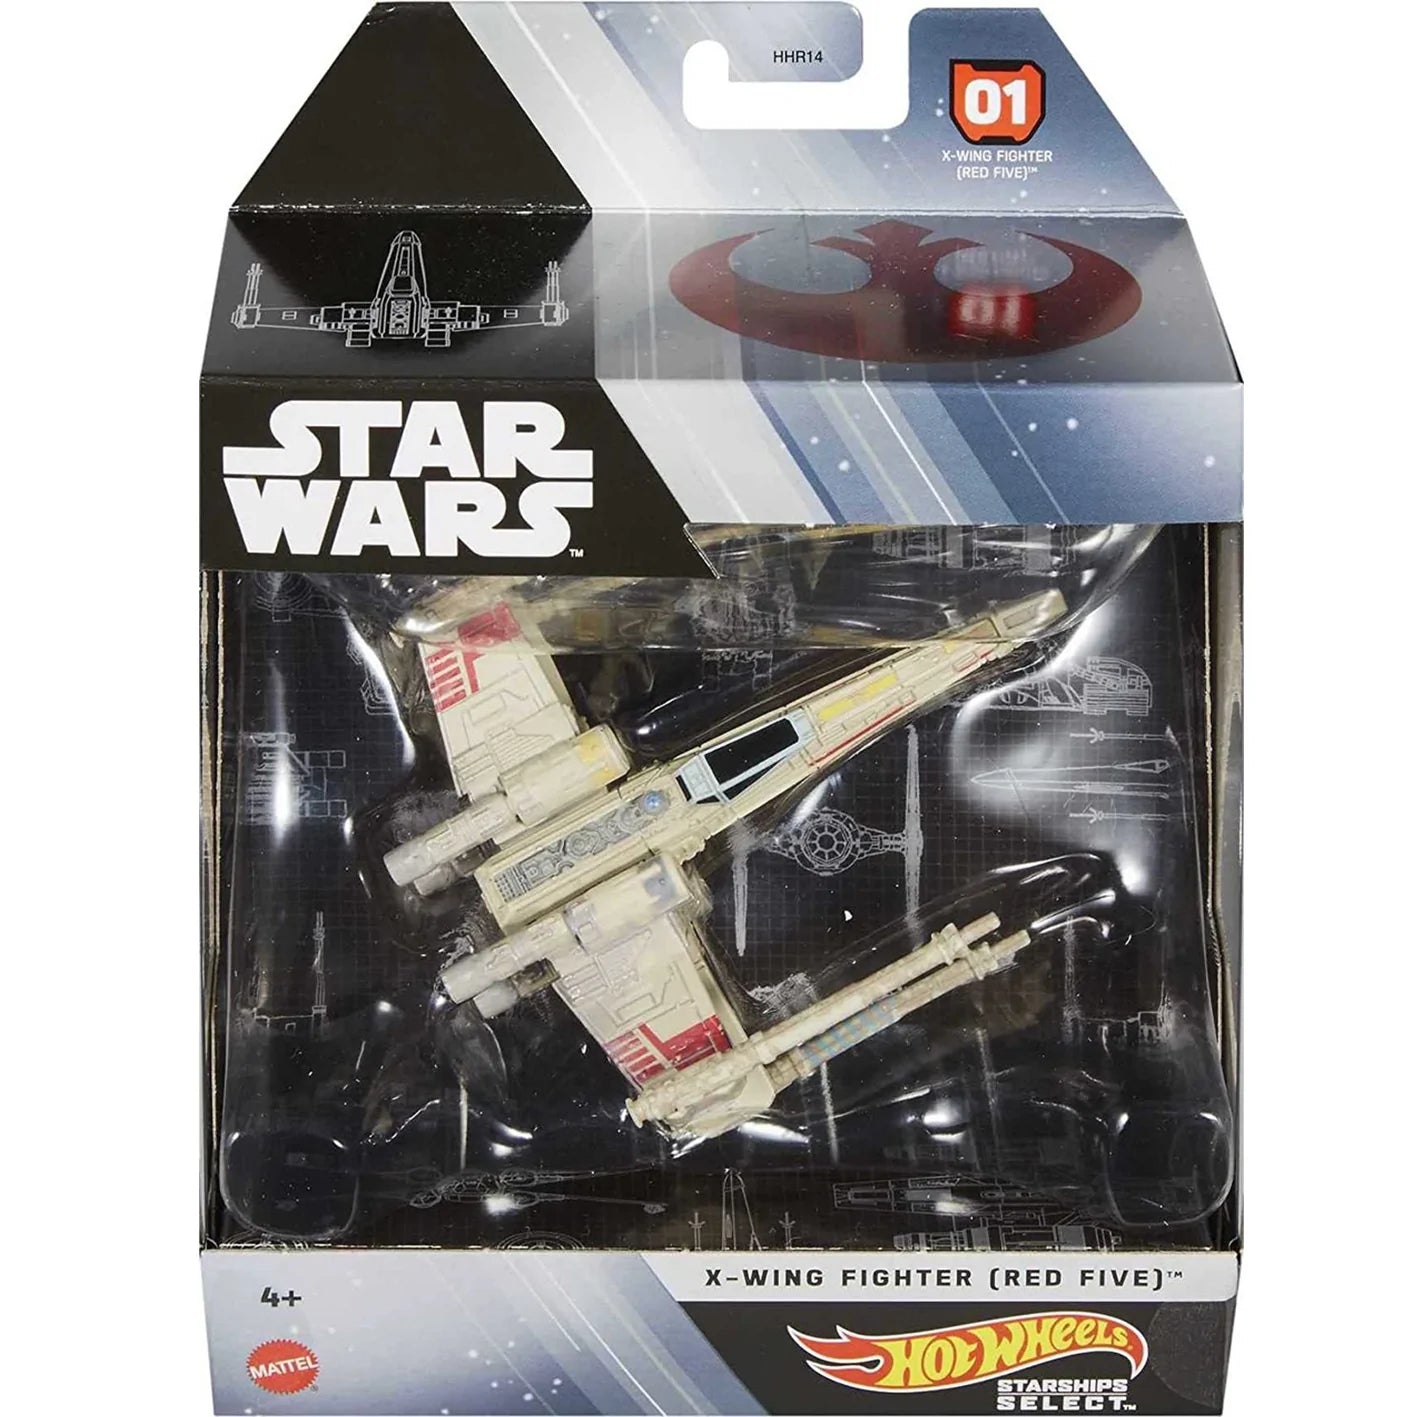 X-Wing Fighter (Red Five), Hot Wheels Starships Select